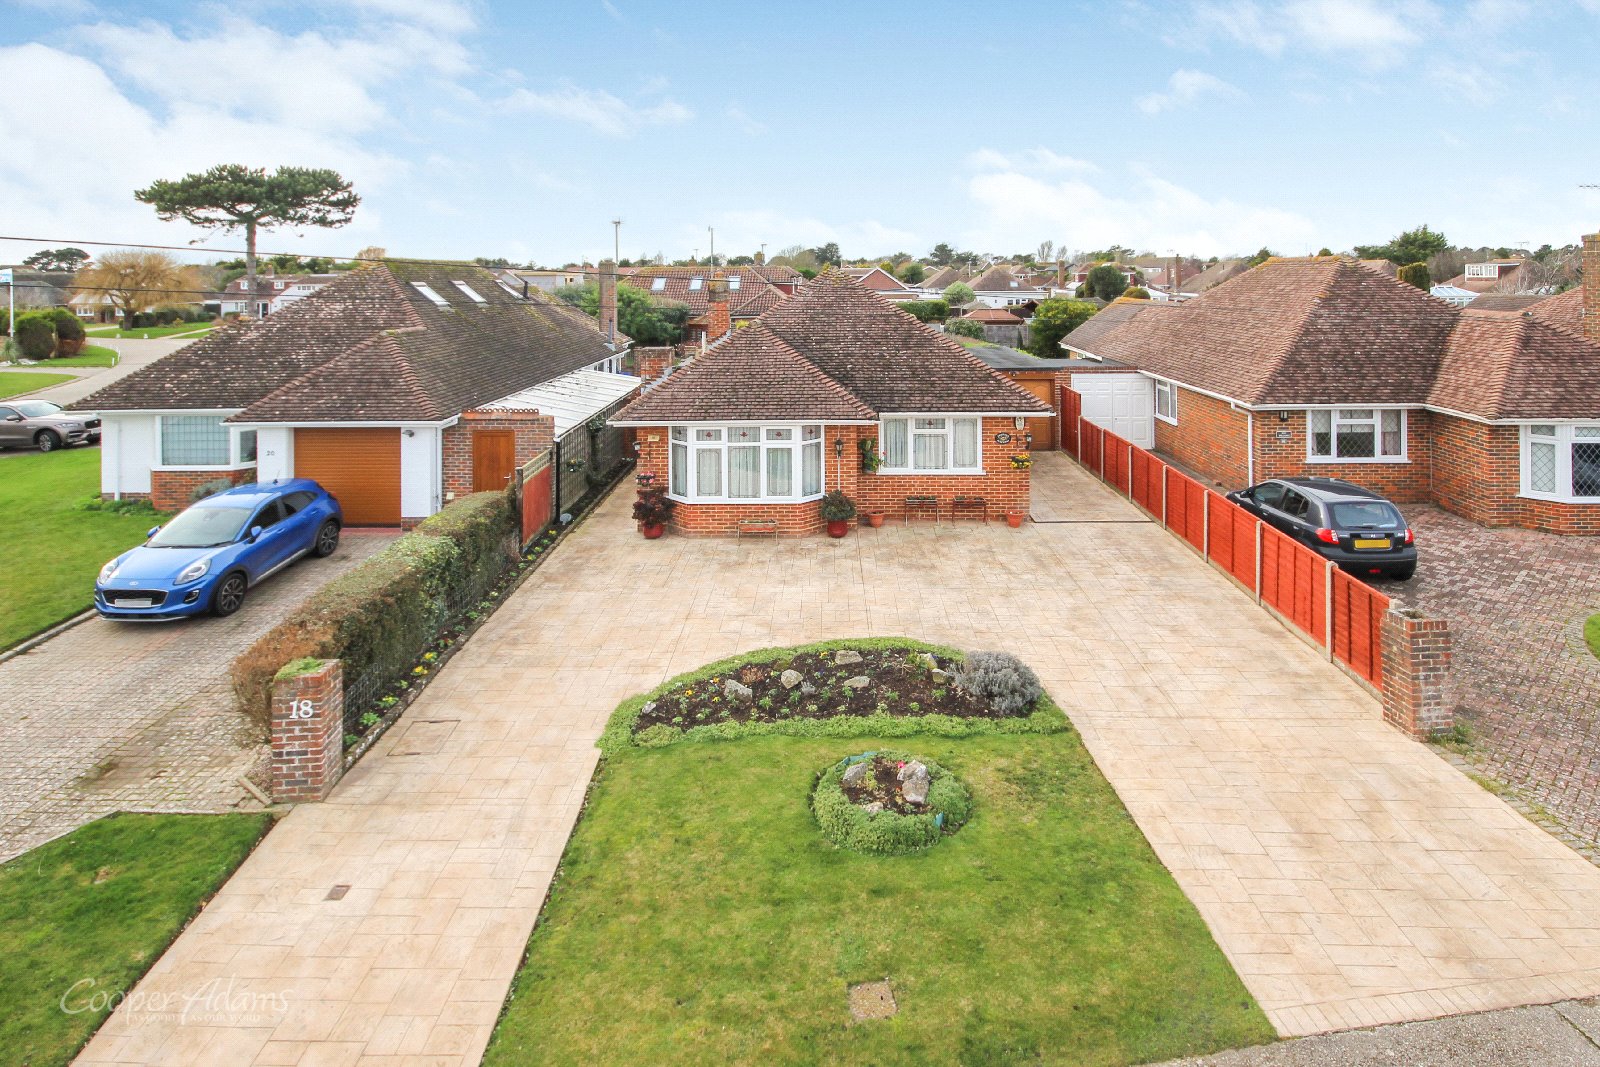 2 bed bungalow for sale in The Ridings, East Preston, BN16